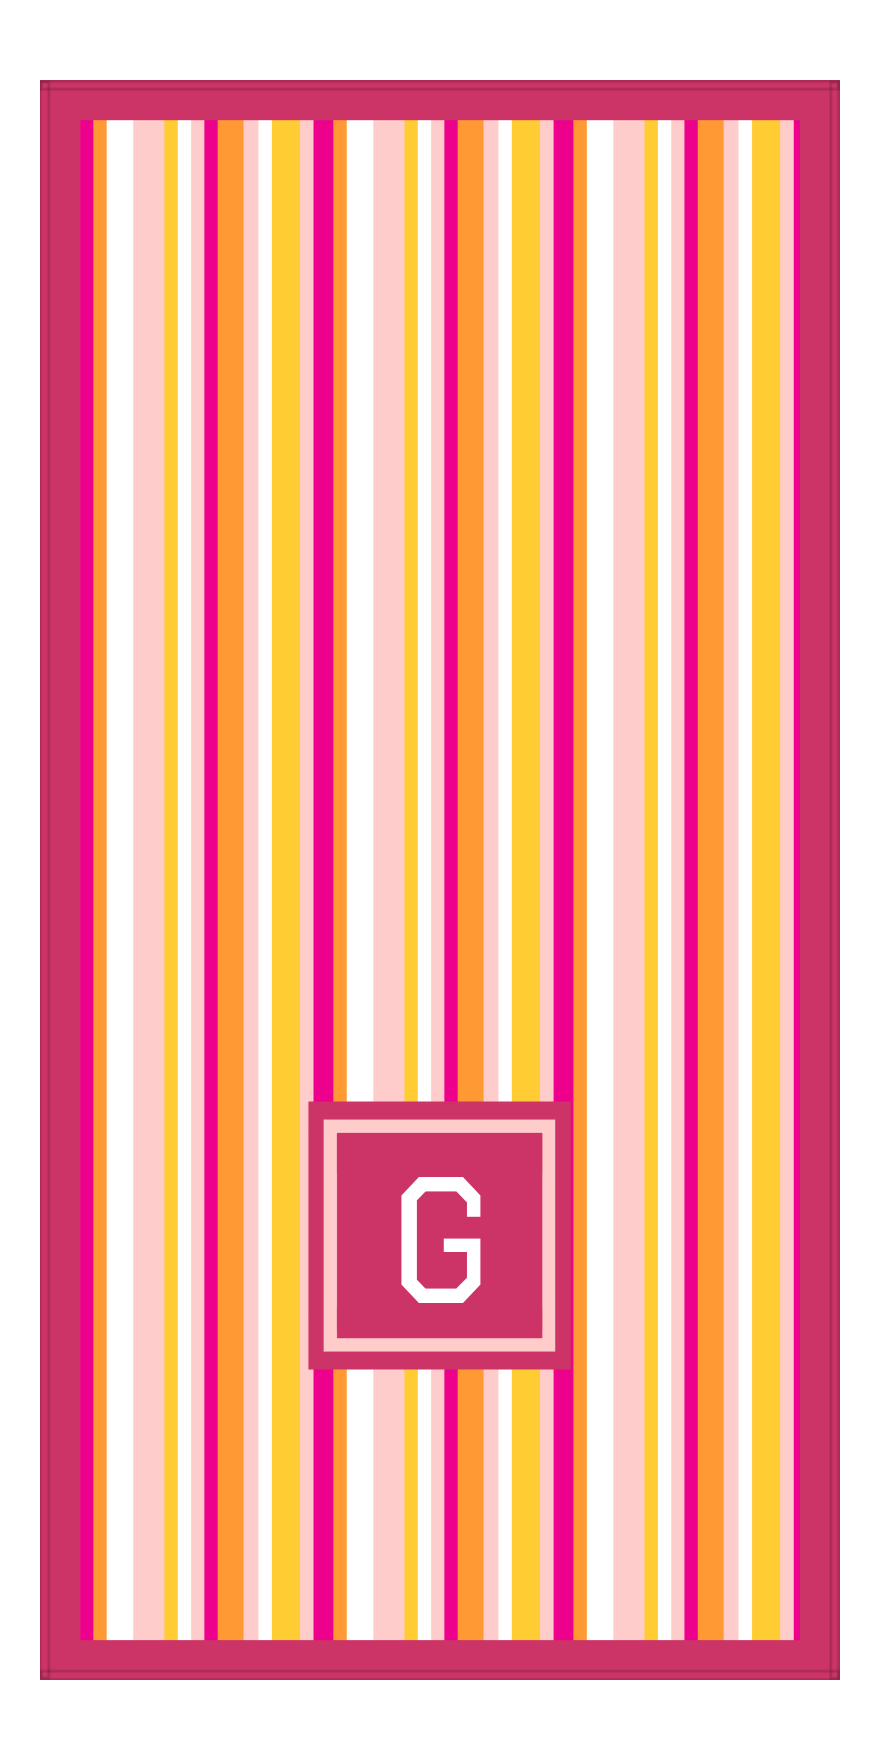 Personalized 5 Color Stripes 3 Repeat Beach Towel - Vertical - Pink and Orange - Square Off Center Frame - Front View